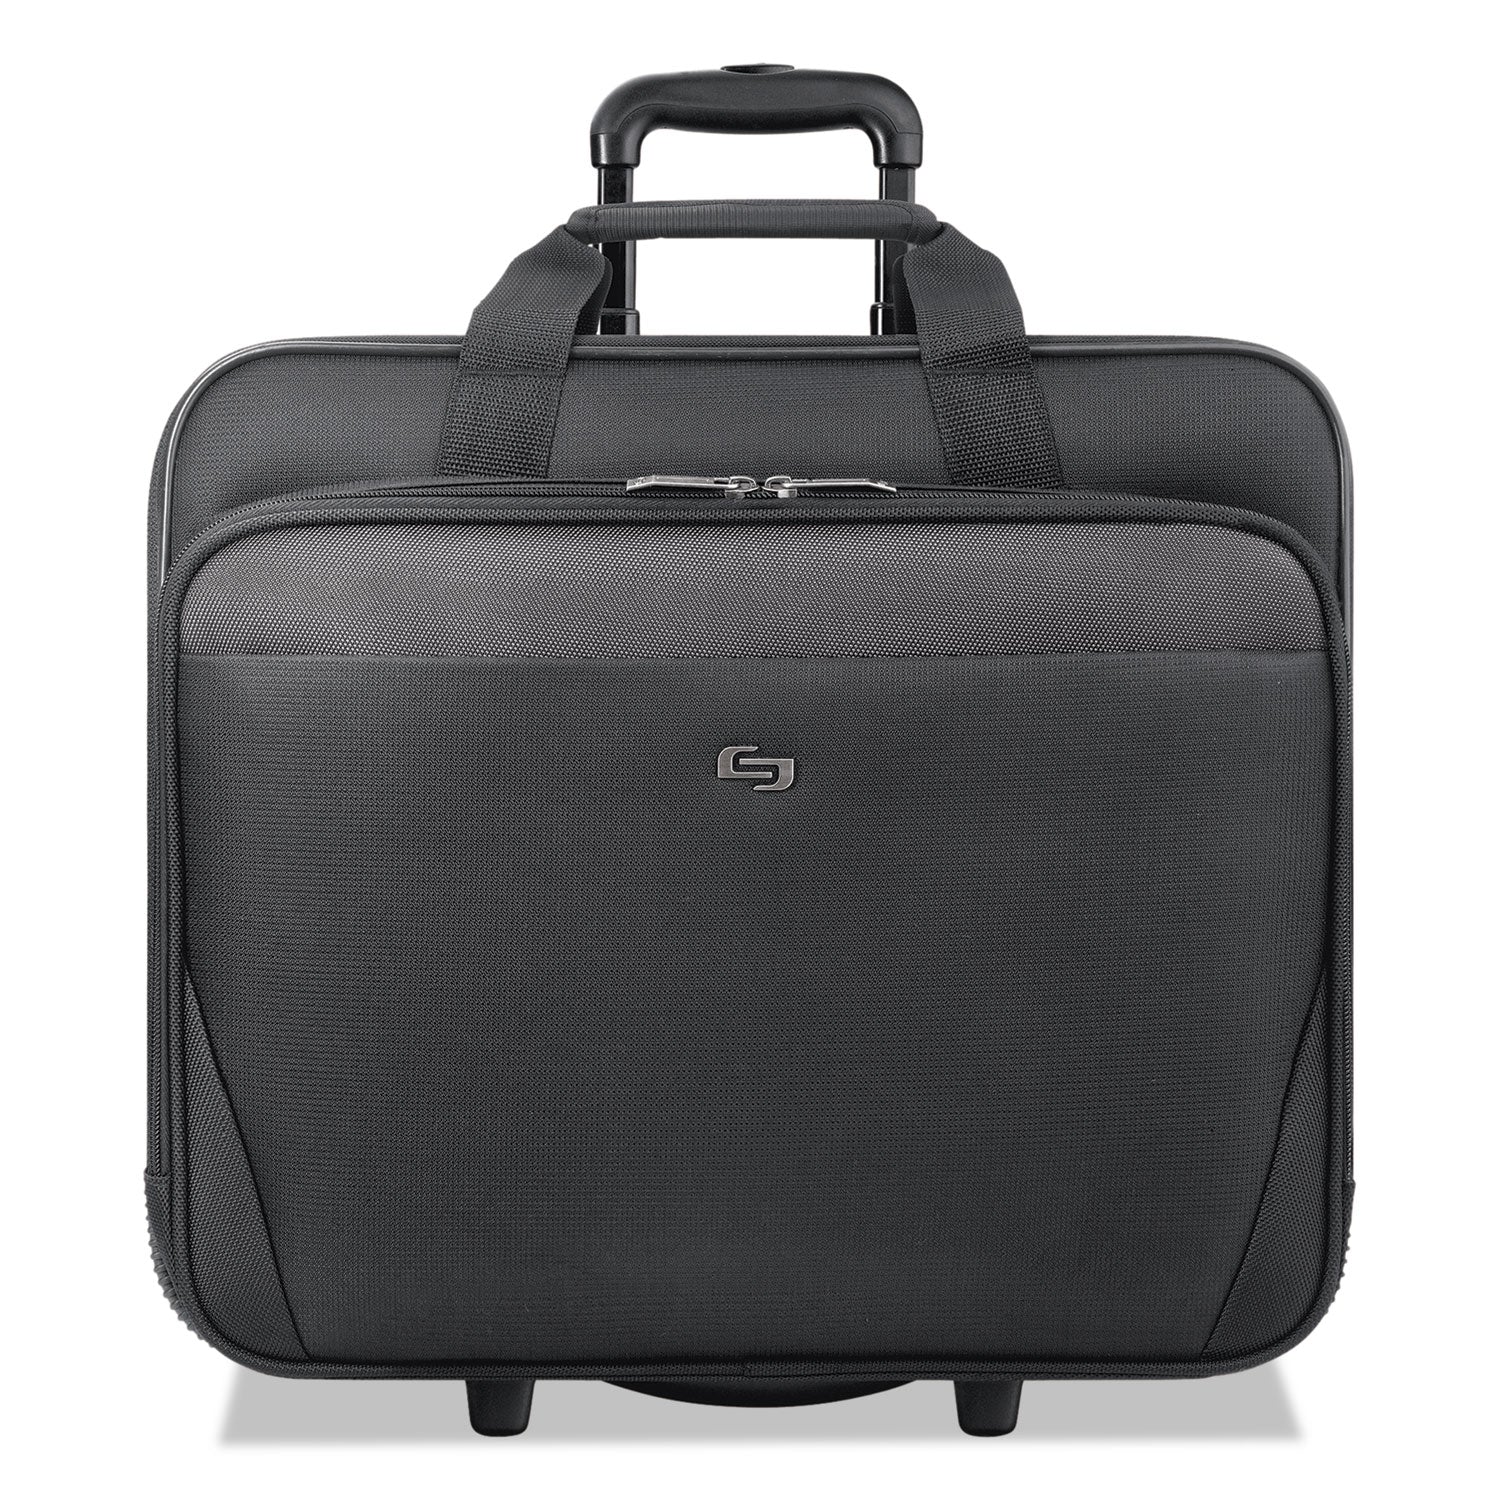 Classic Rolling Case, Fits Devices Up to 17.3", Polyester, 16.75 x 7 x 14.38, Black - 